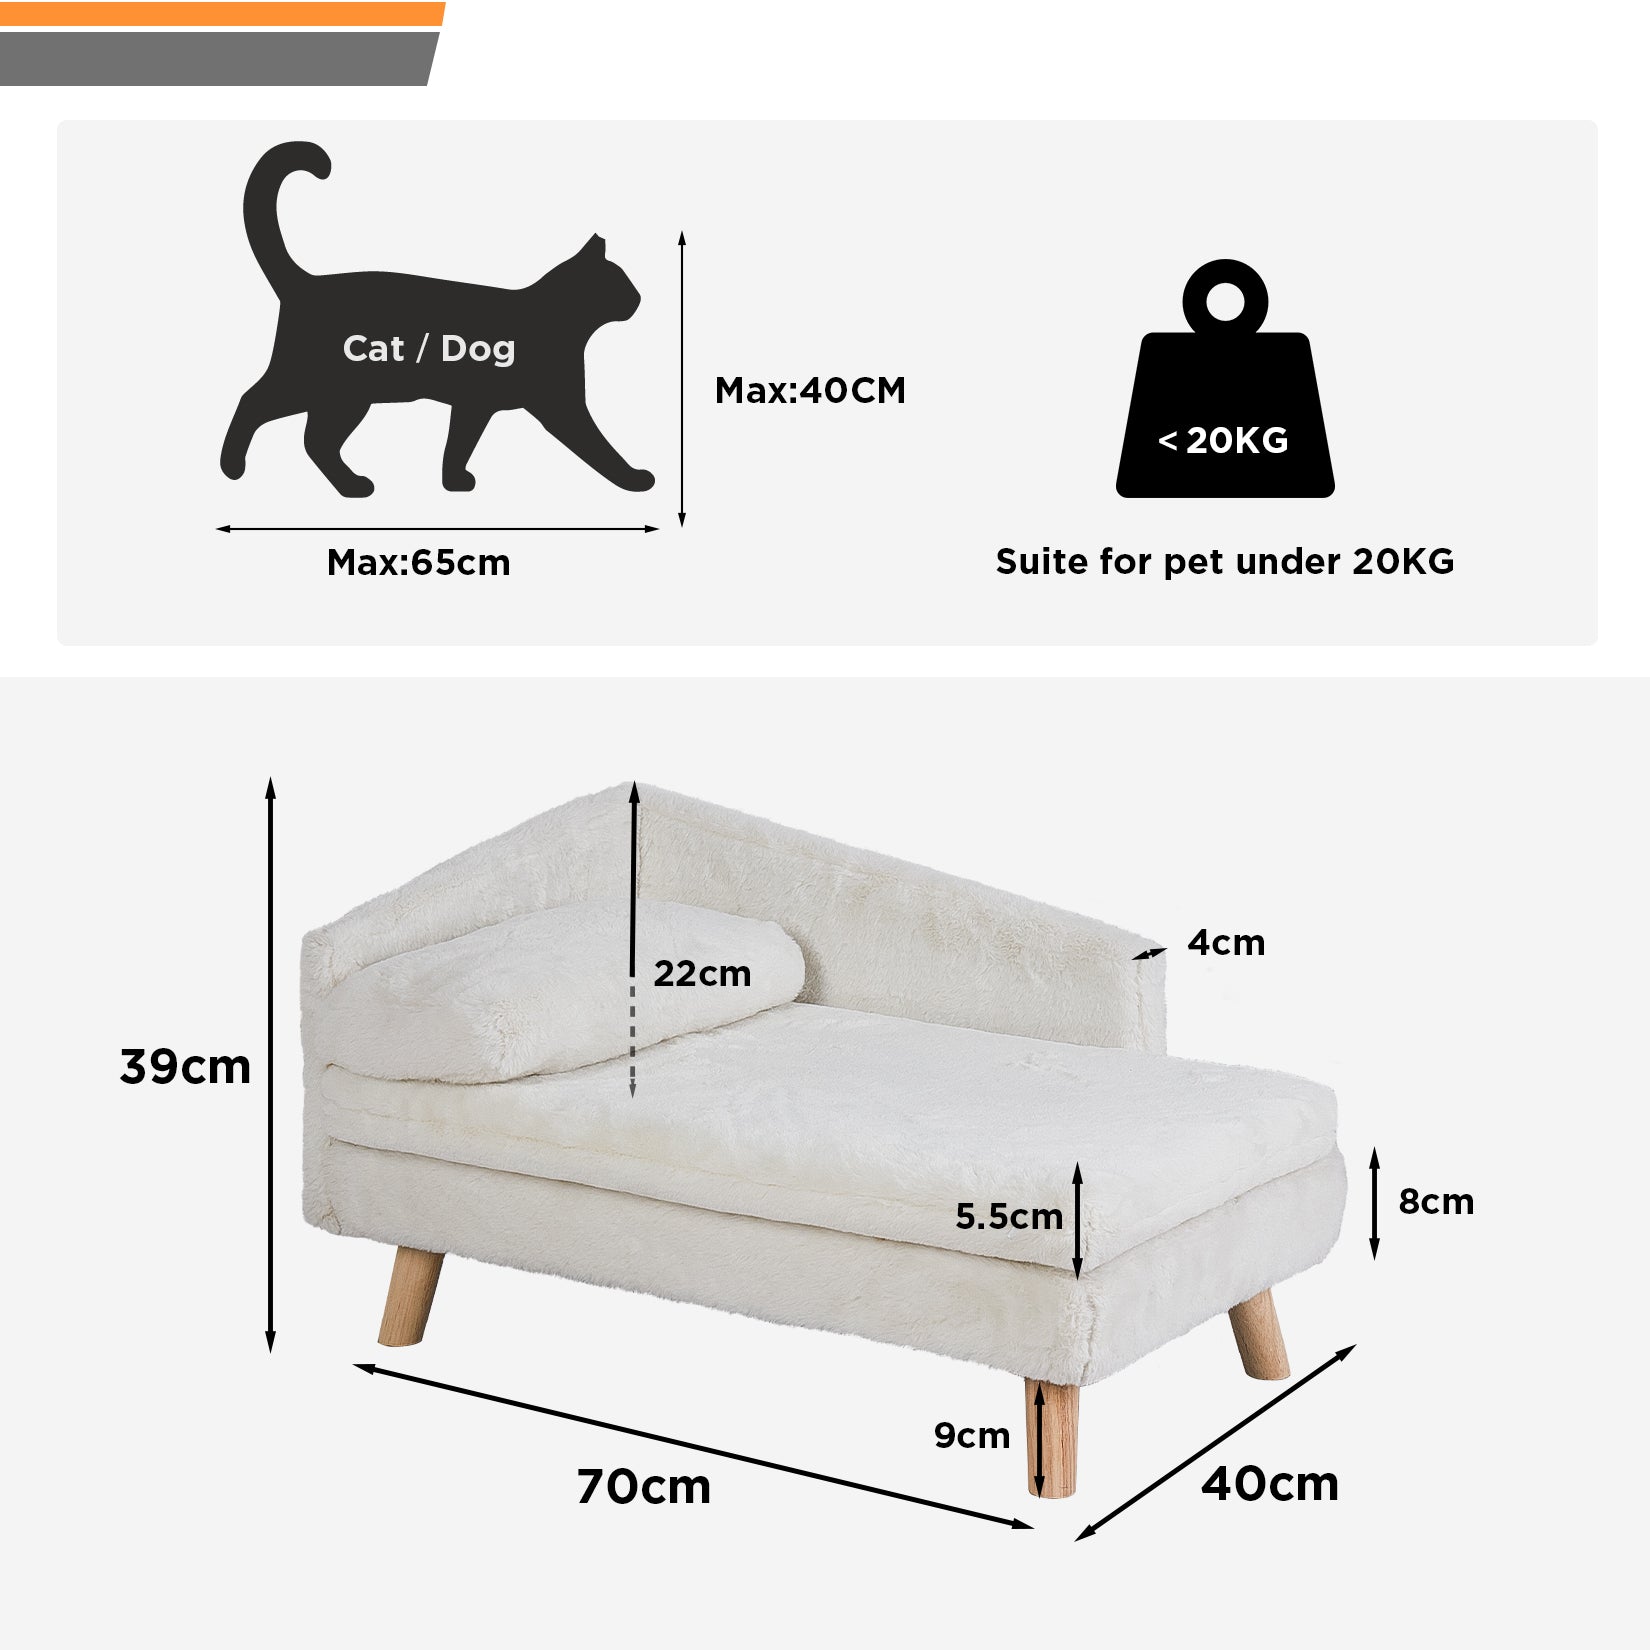 【Get a Warm Winter】The lounge bed comes with a cushion mattress and pillow, all are made of a plush linter fabric that feels smooth and soft, no harmful odors and safe for cute pets, it’ll keep your pets away from cold days, lends themselves to a very cozy and warm winter months. Easy to clean the cover with zippers, waterproof function protects the bed from liquid 